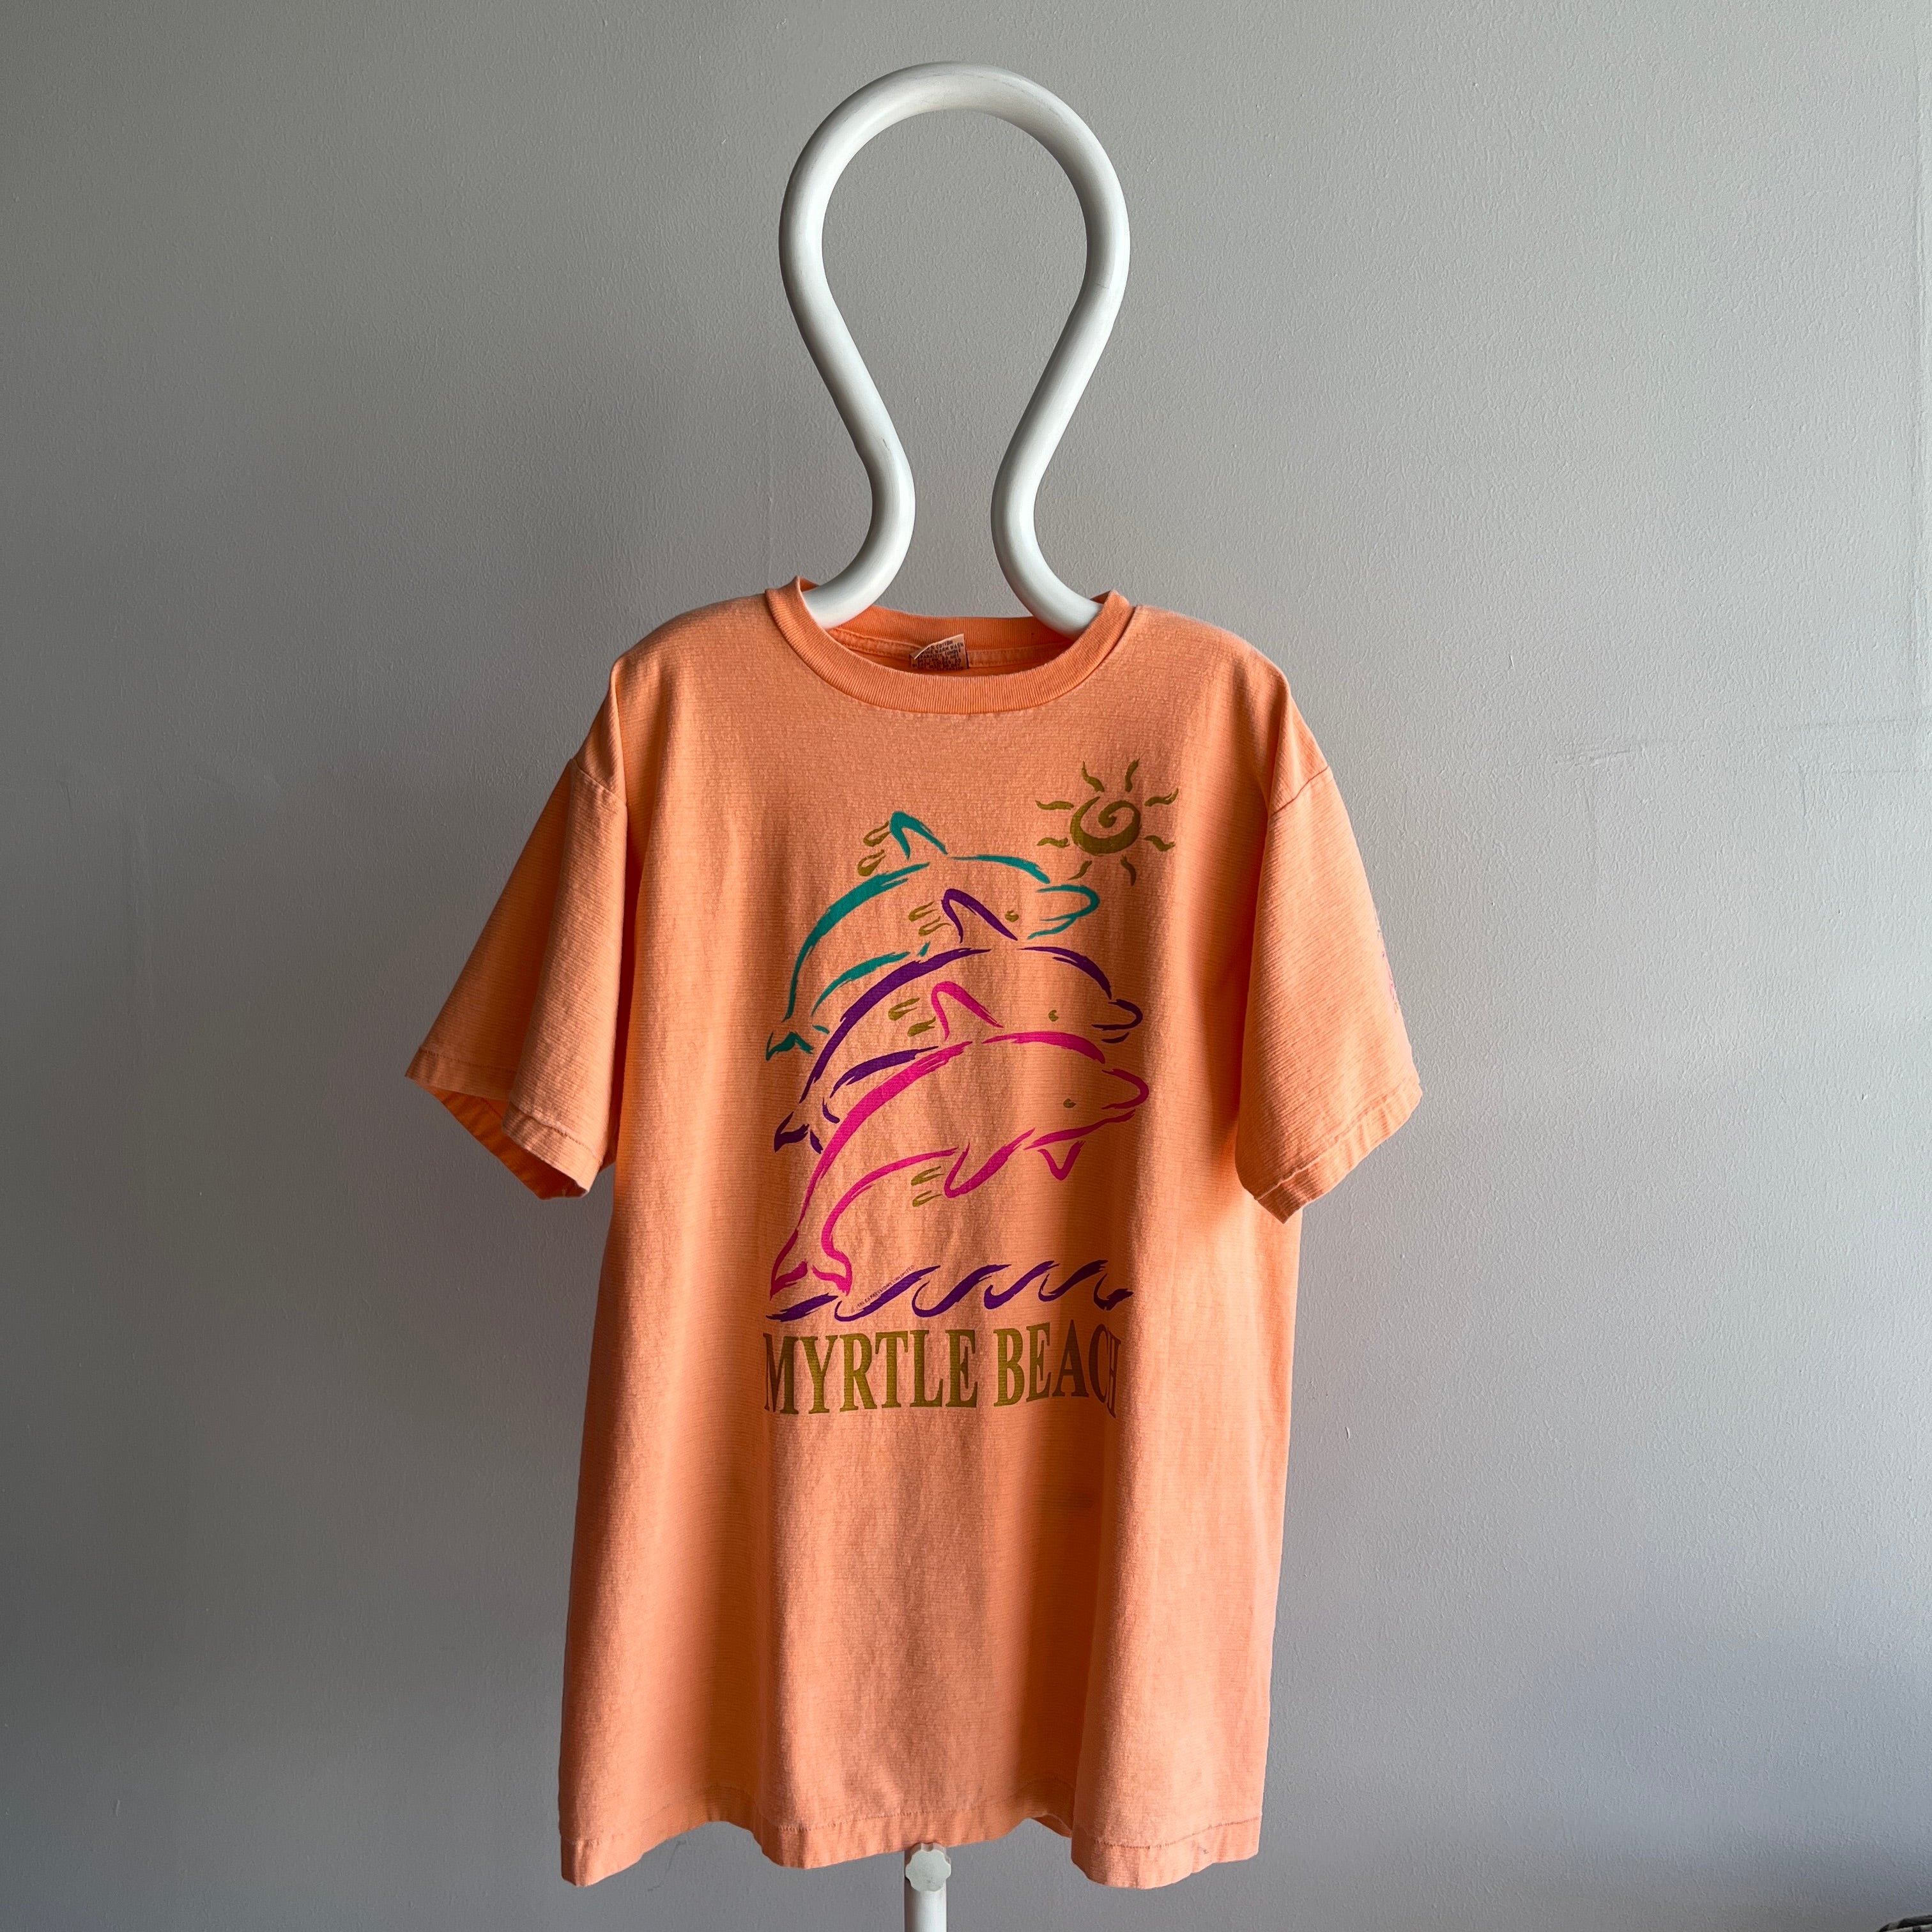 1994 Pinstriped Myrtle Beach Sightly Structured Faded Neon T-Shirt